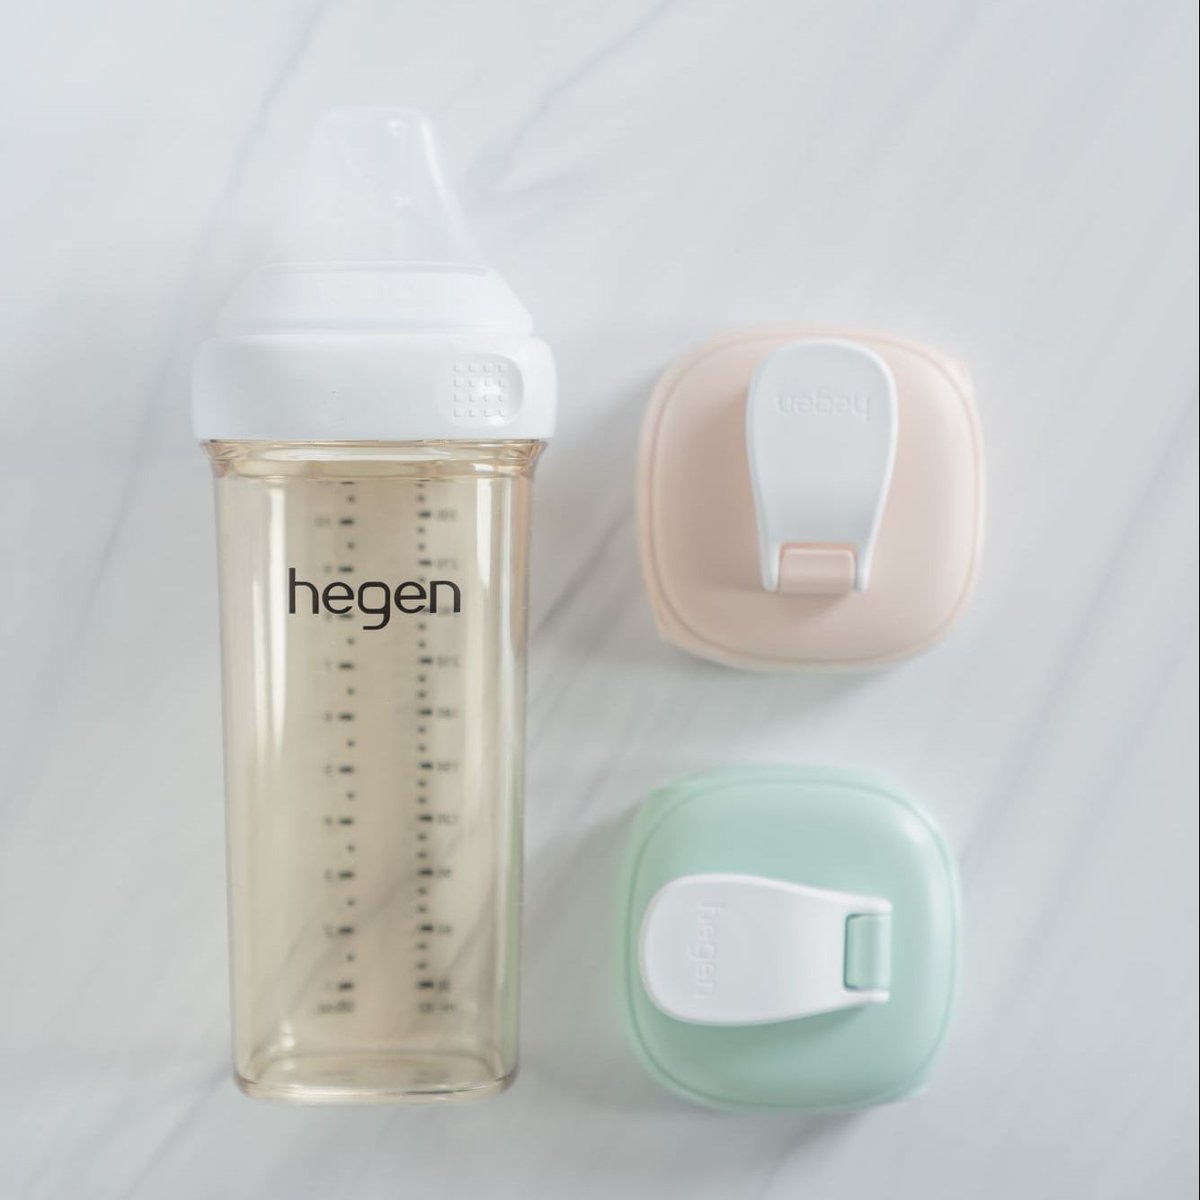 From Feeding Bottle to Drinking Bottle! ⁠ Our versatile Hegen bottles transform from feeding bottles into Drinking Bottles with the change of a lid! ⁠⁠ 👉 Click below for this and other great Hegen products!⁠ l8r.it/HD7l #hegenuk #baby #babybottles